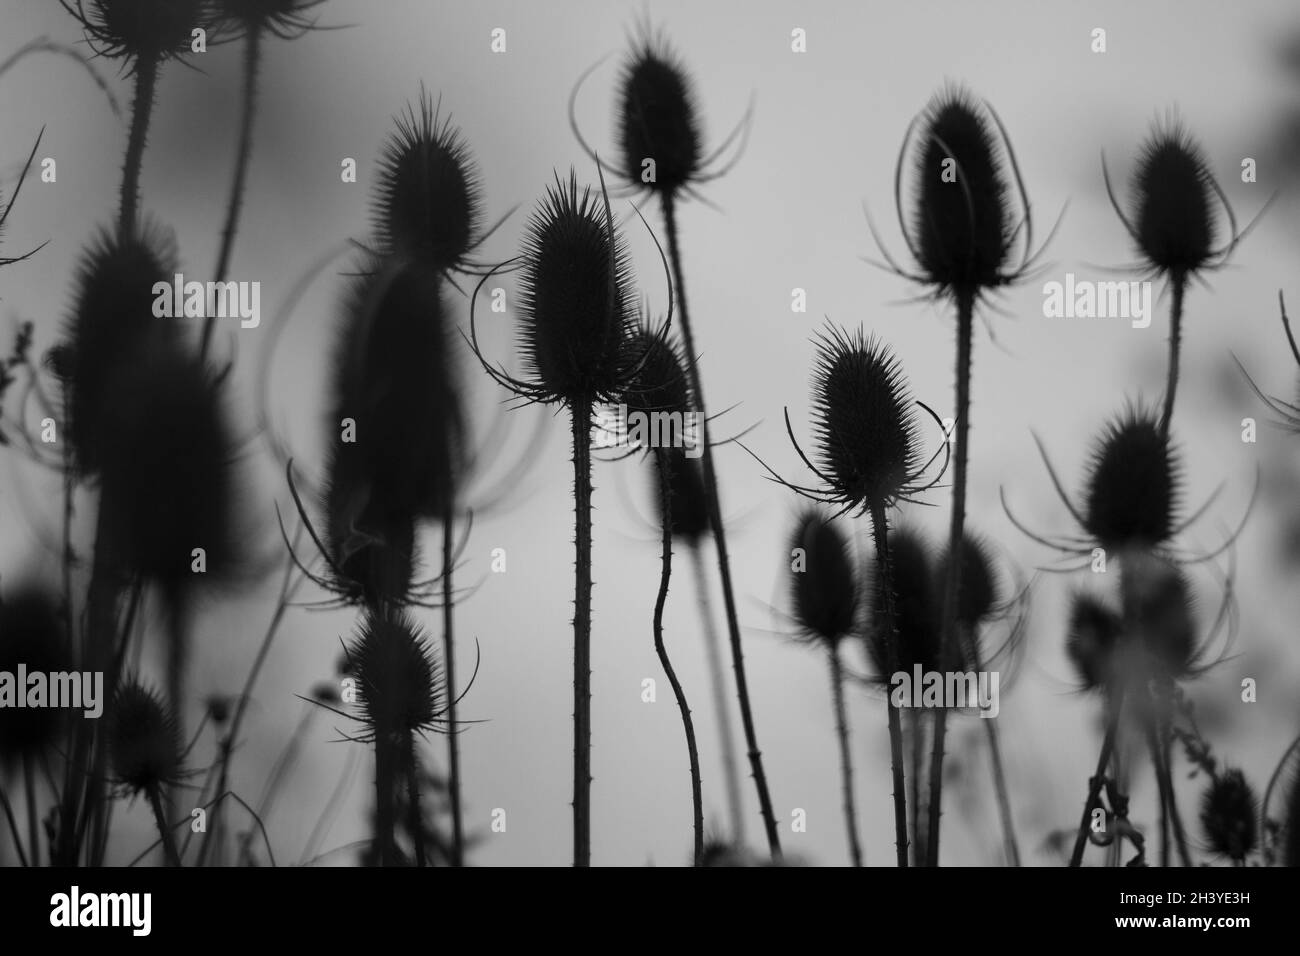 Background of dry plants. Stems of a thorny plant. Silhouettes of thorns against the sky. Stock Photo